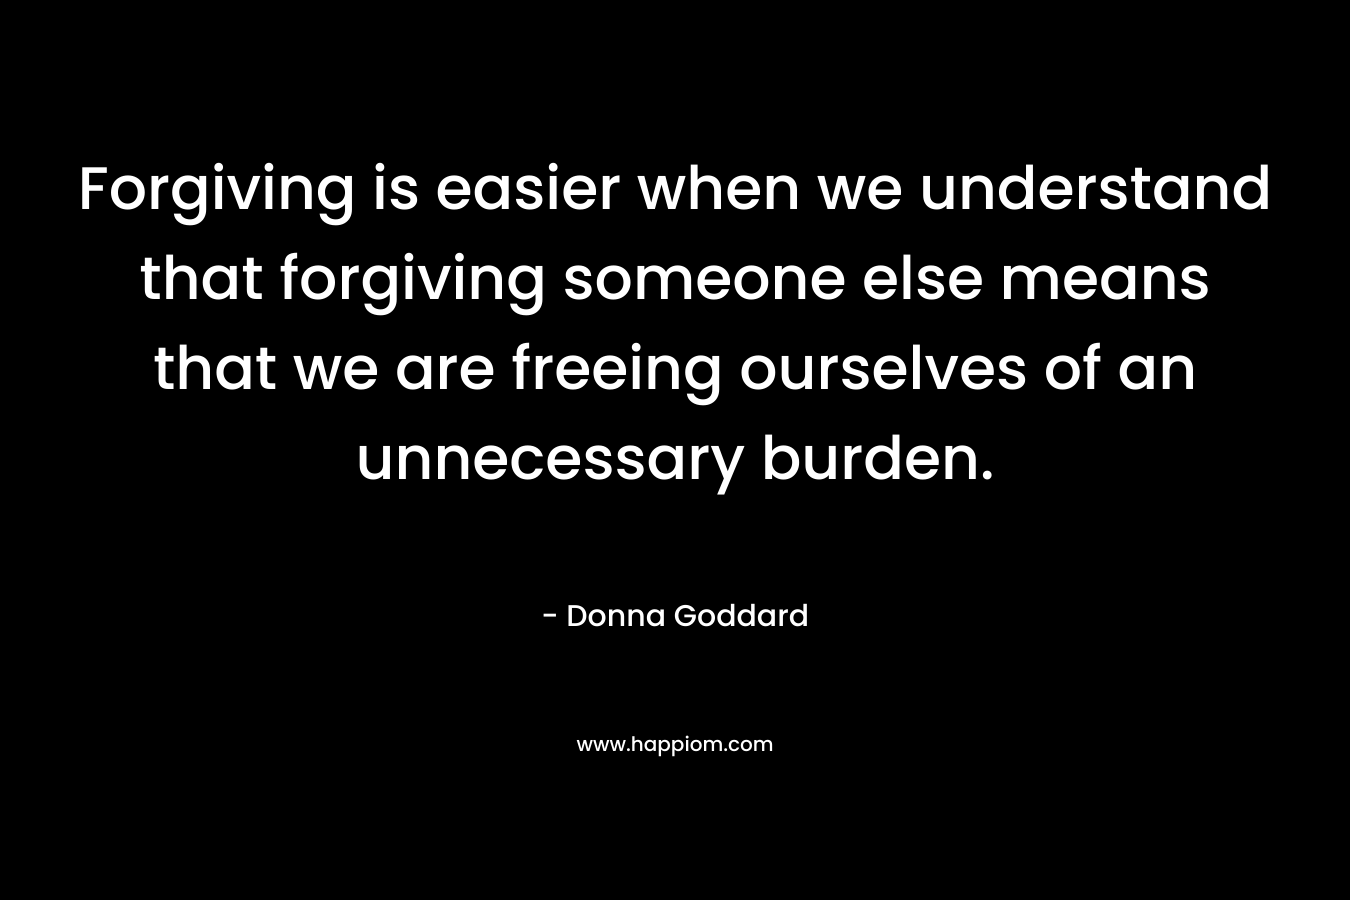 Forgiving is easier when we understand that forgiving someone else means that we are freeing ourselves of an unnecessary burden.